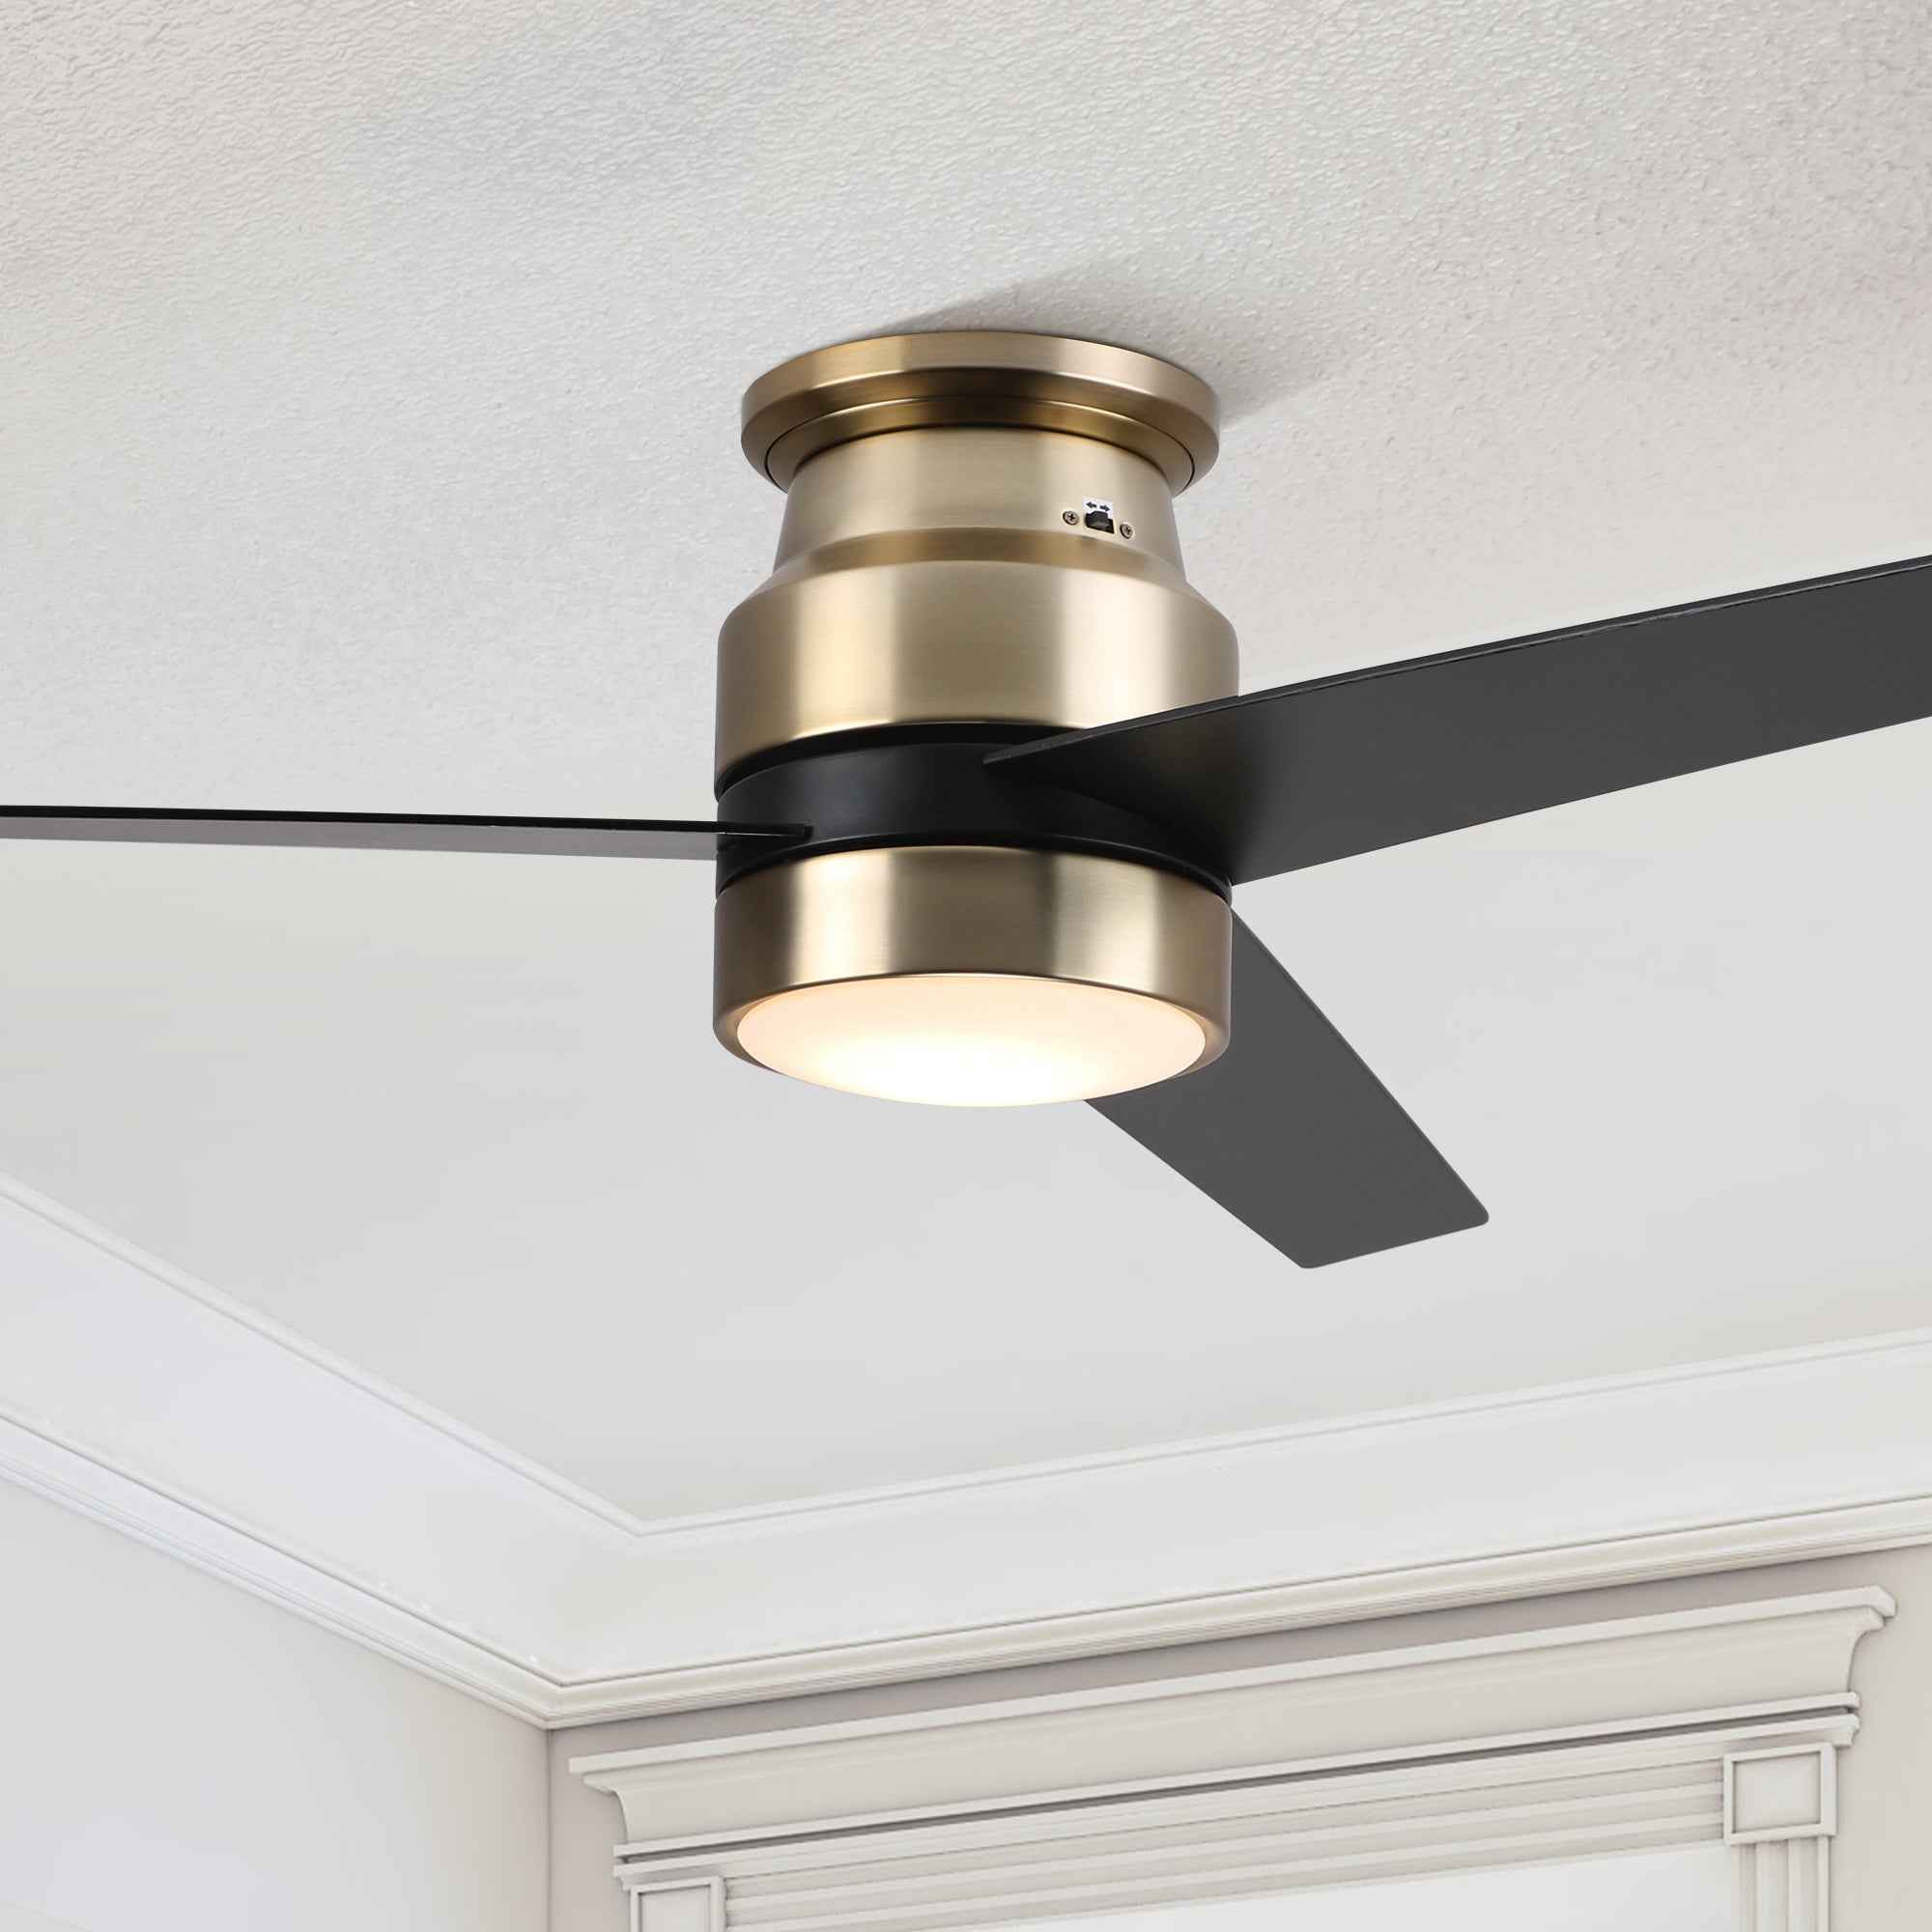 Smafan Ranger smart ceiling fan with energy-efficient LED light kit has 3000 lumens and lasts over 50000+ hours. #color_Black-Gold